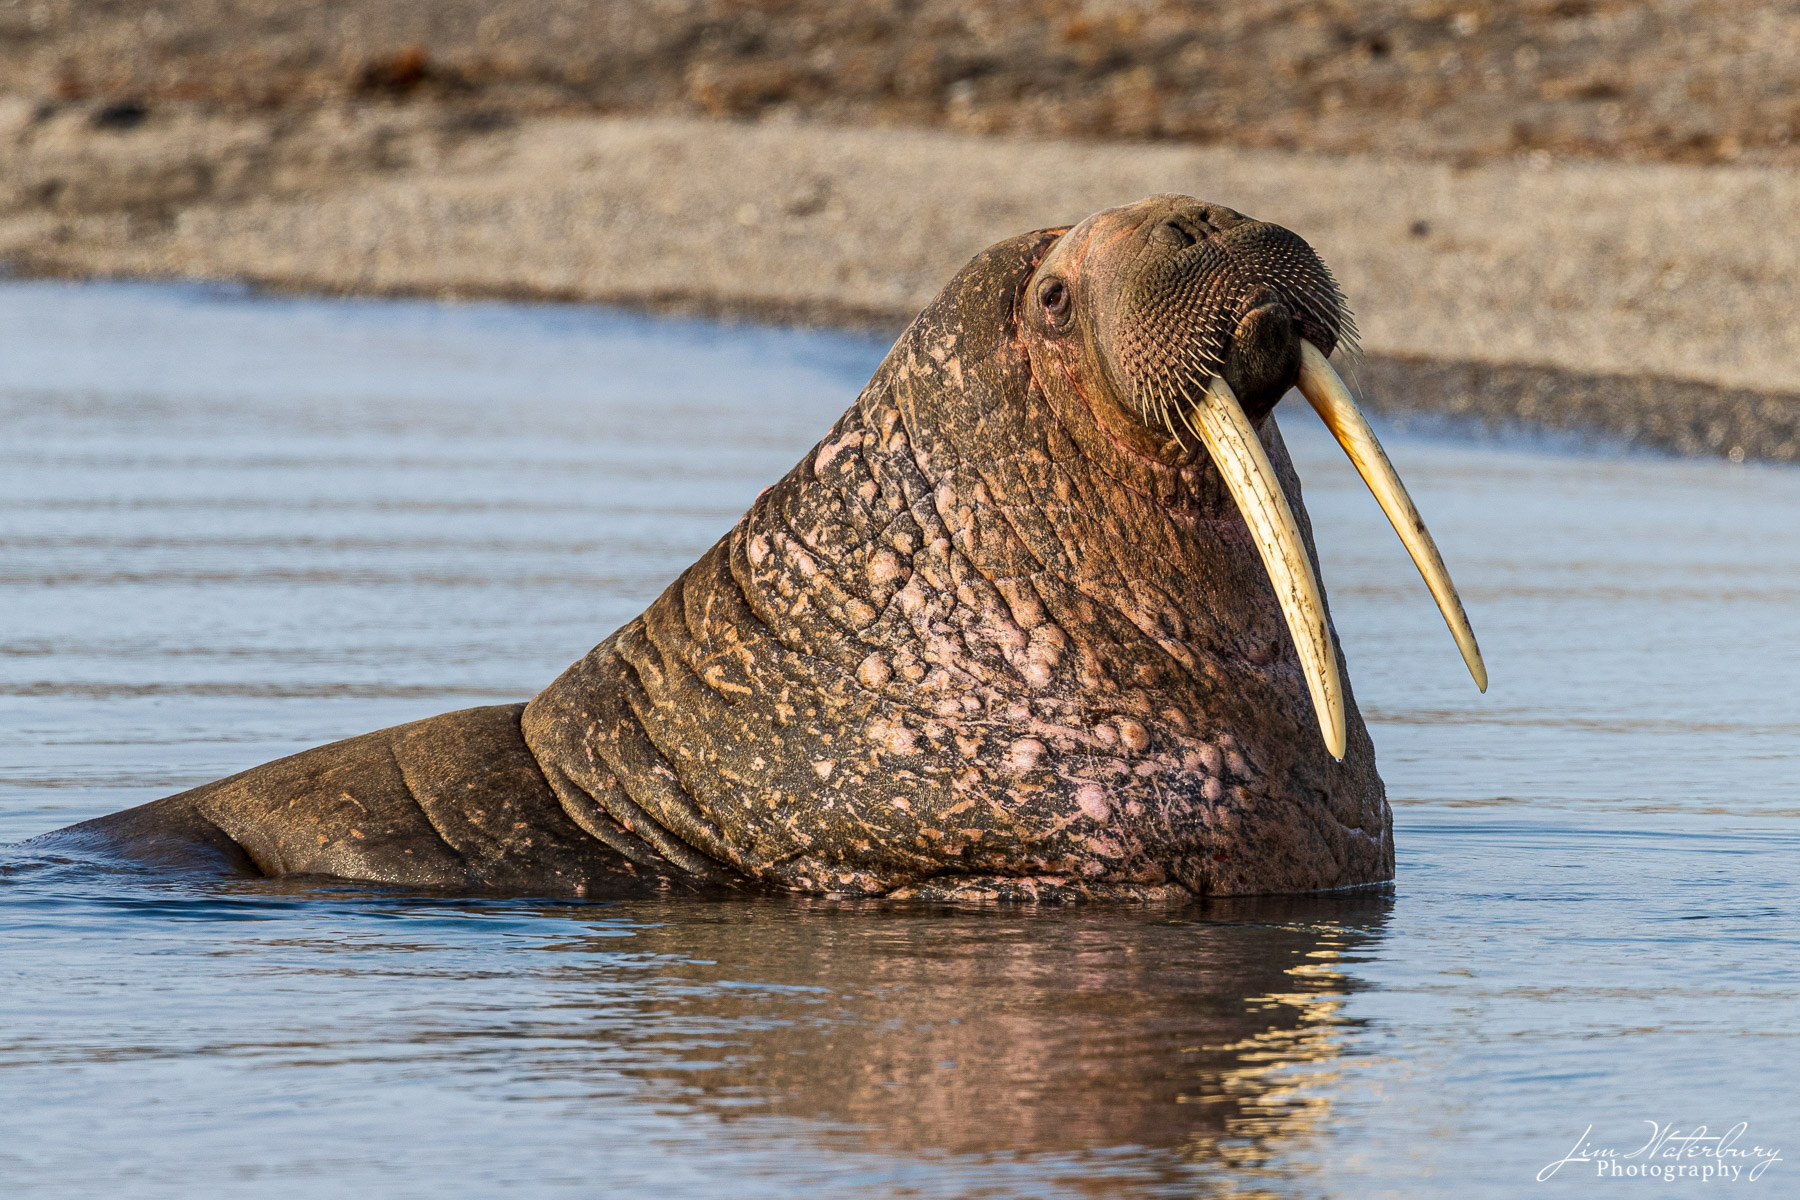 A large walrus surfaces from the polar waters around Svalbard.